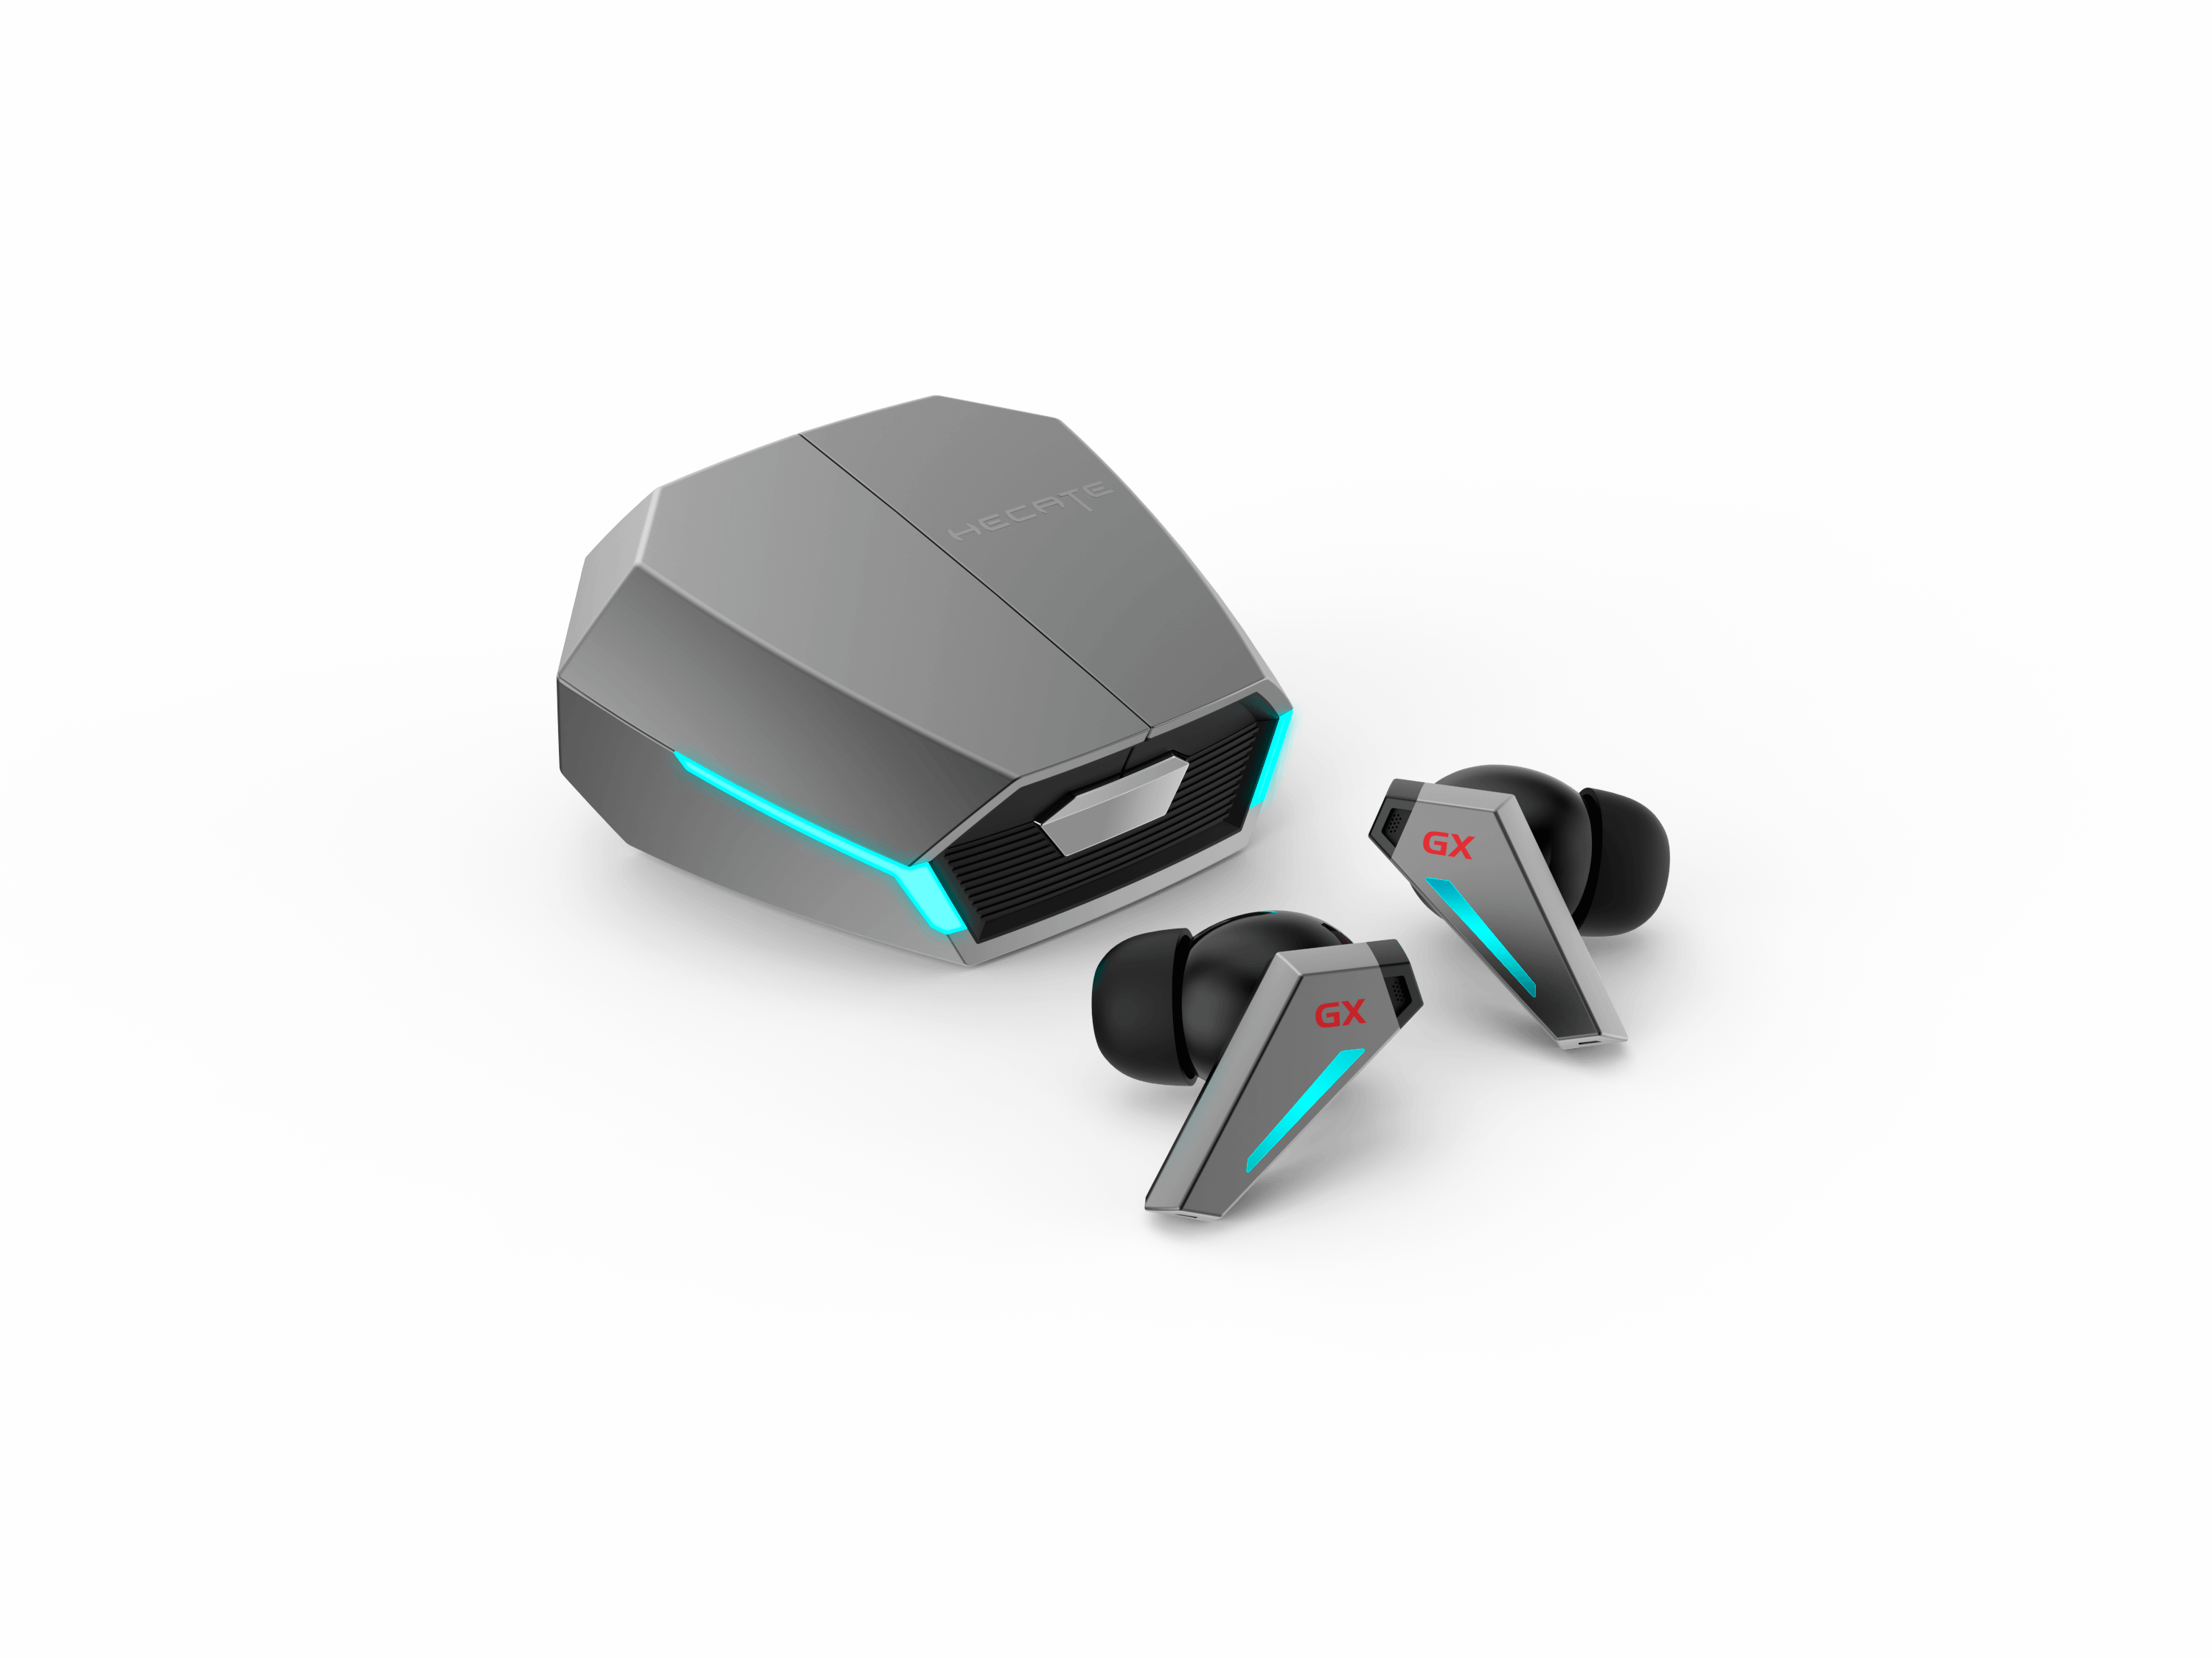 GX07 True Wireless Gaming Earbuds with Active Noise Cancellation